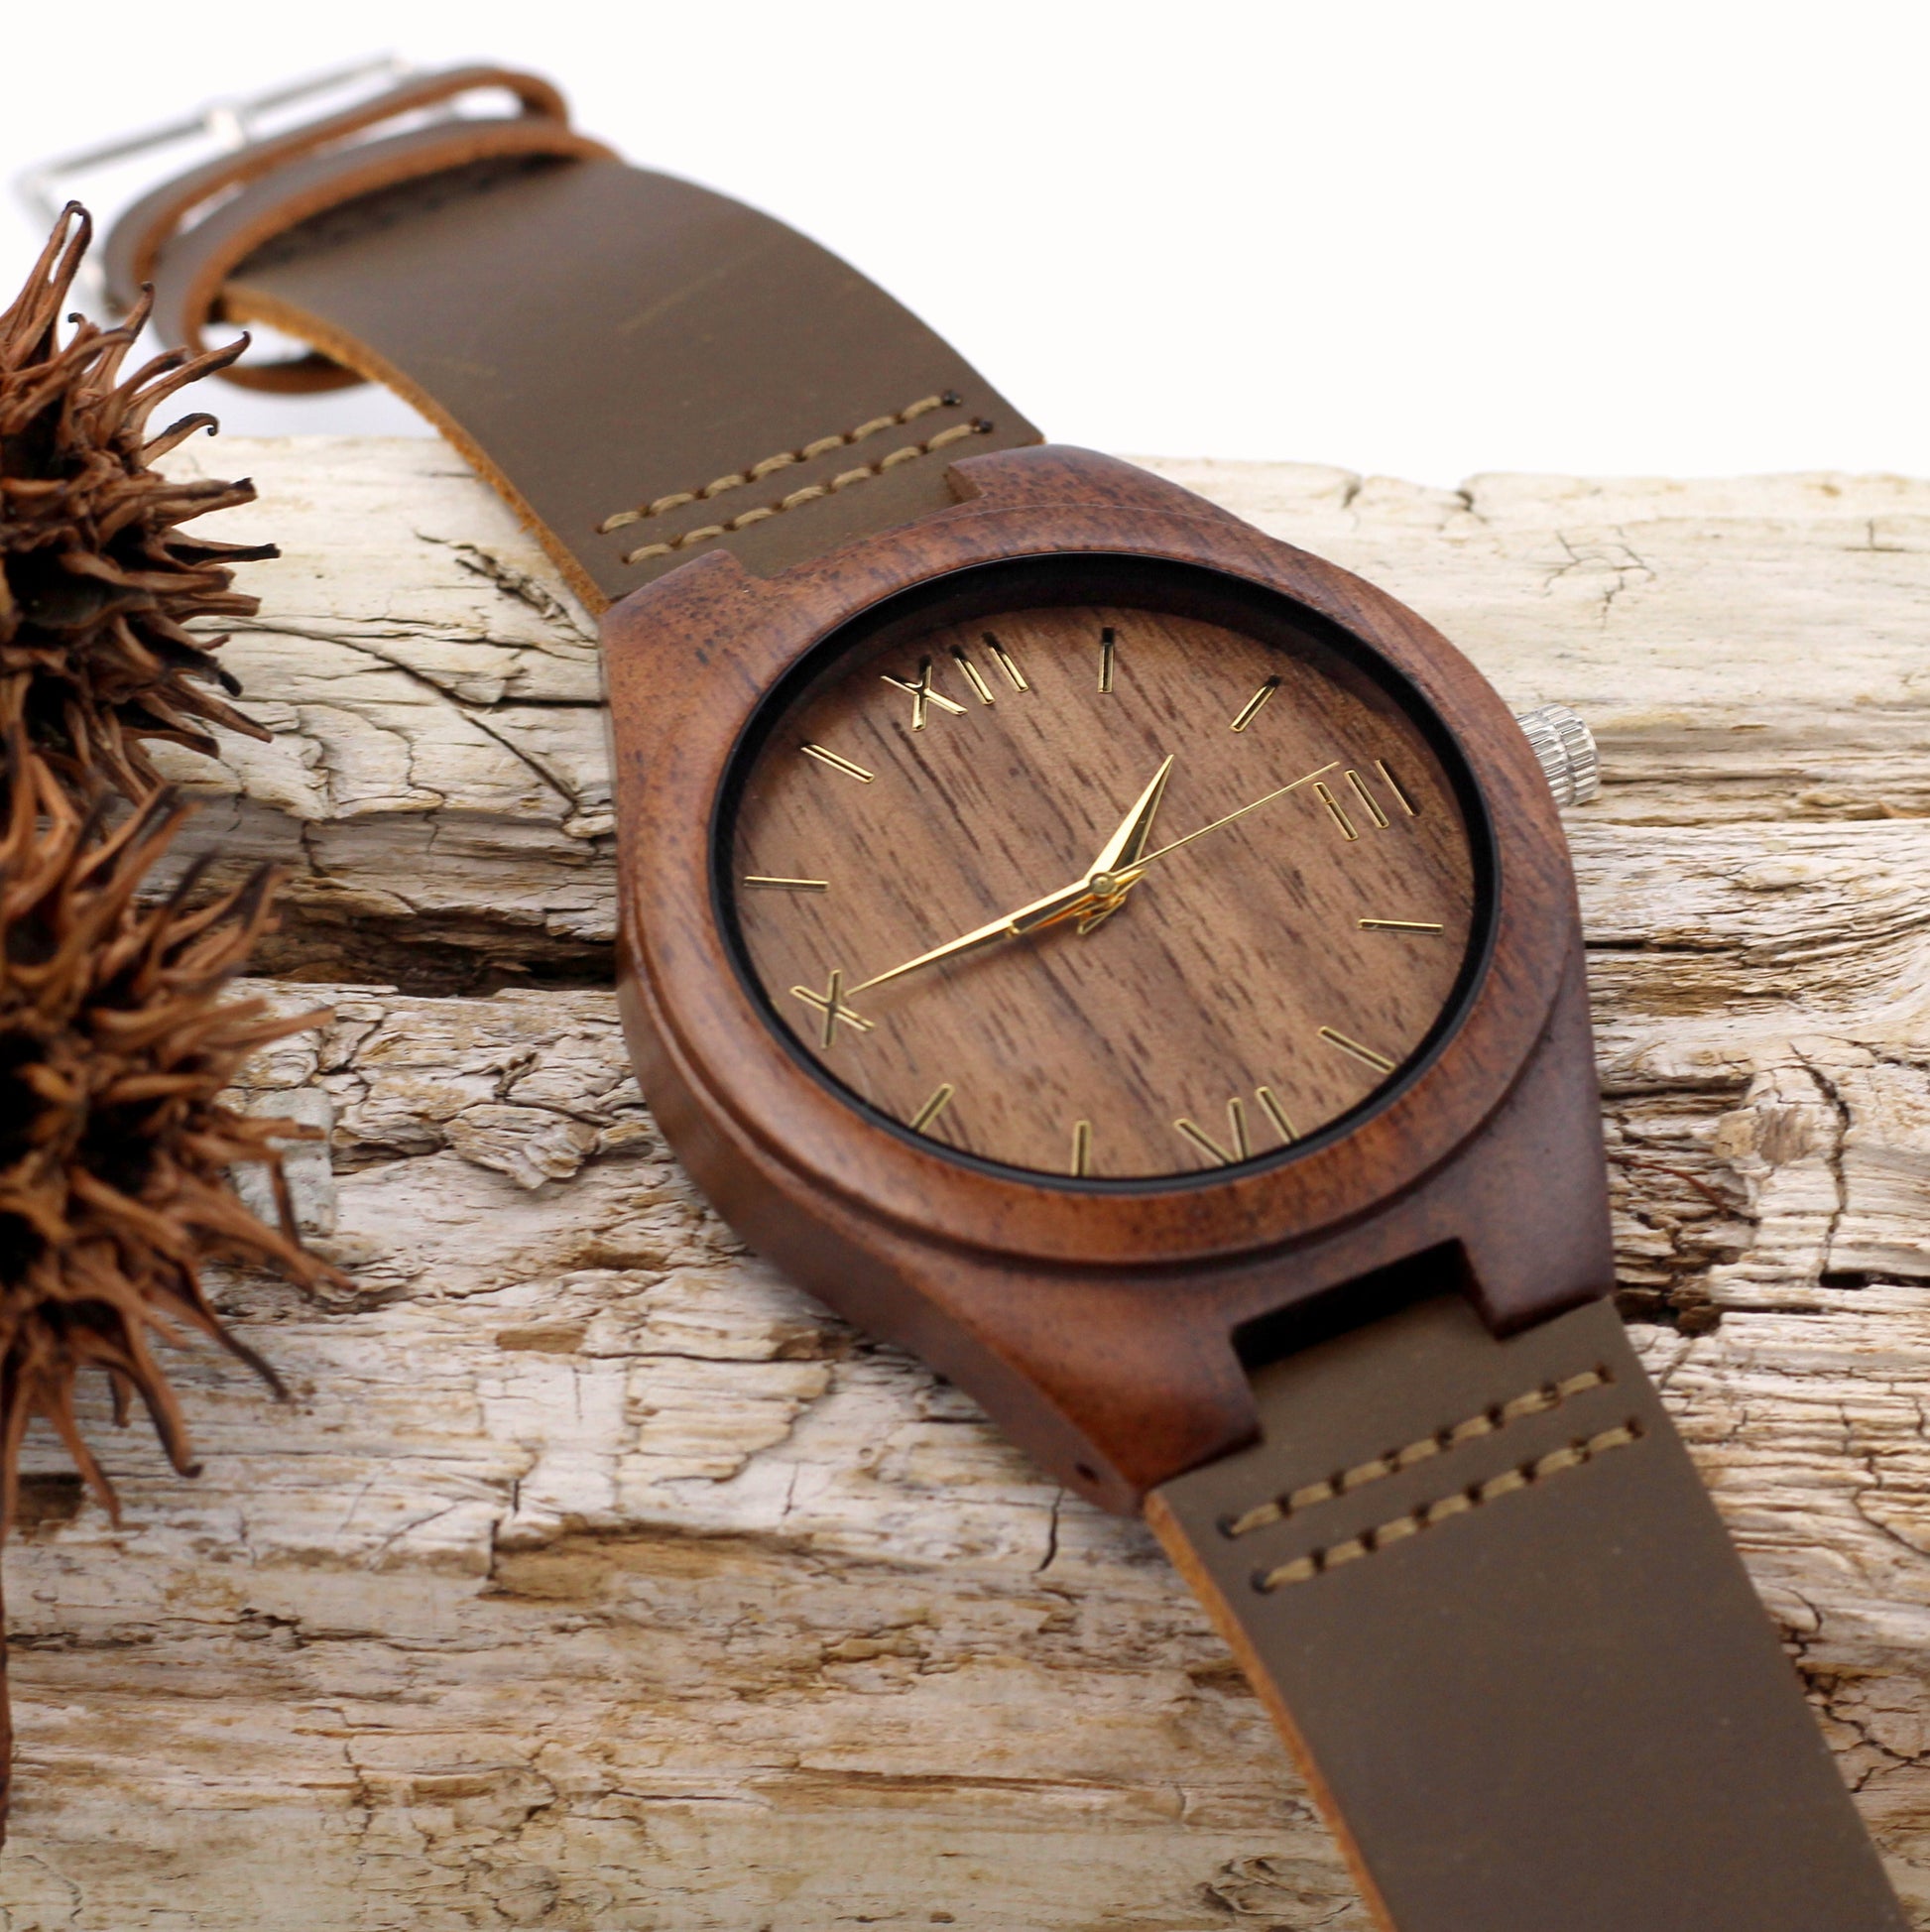 MANLY COCOA Wooden Watch with Brown Leather Strap - Hashtag Bamboo